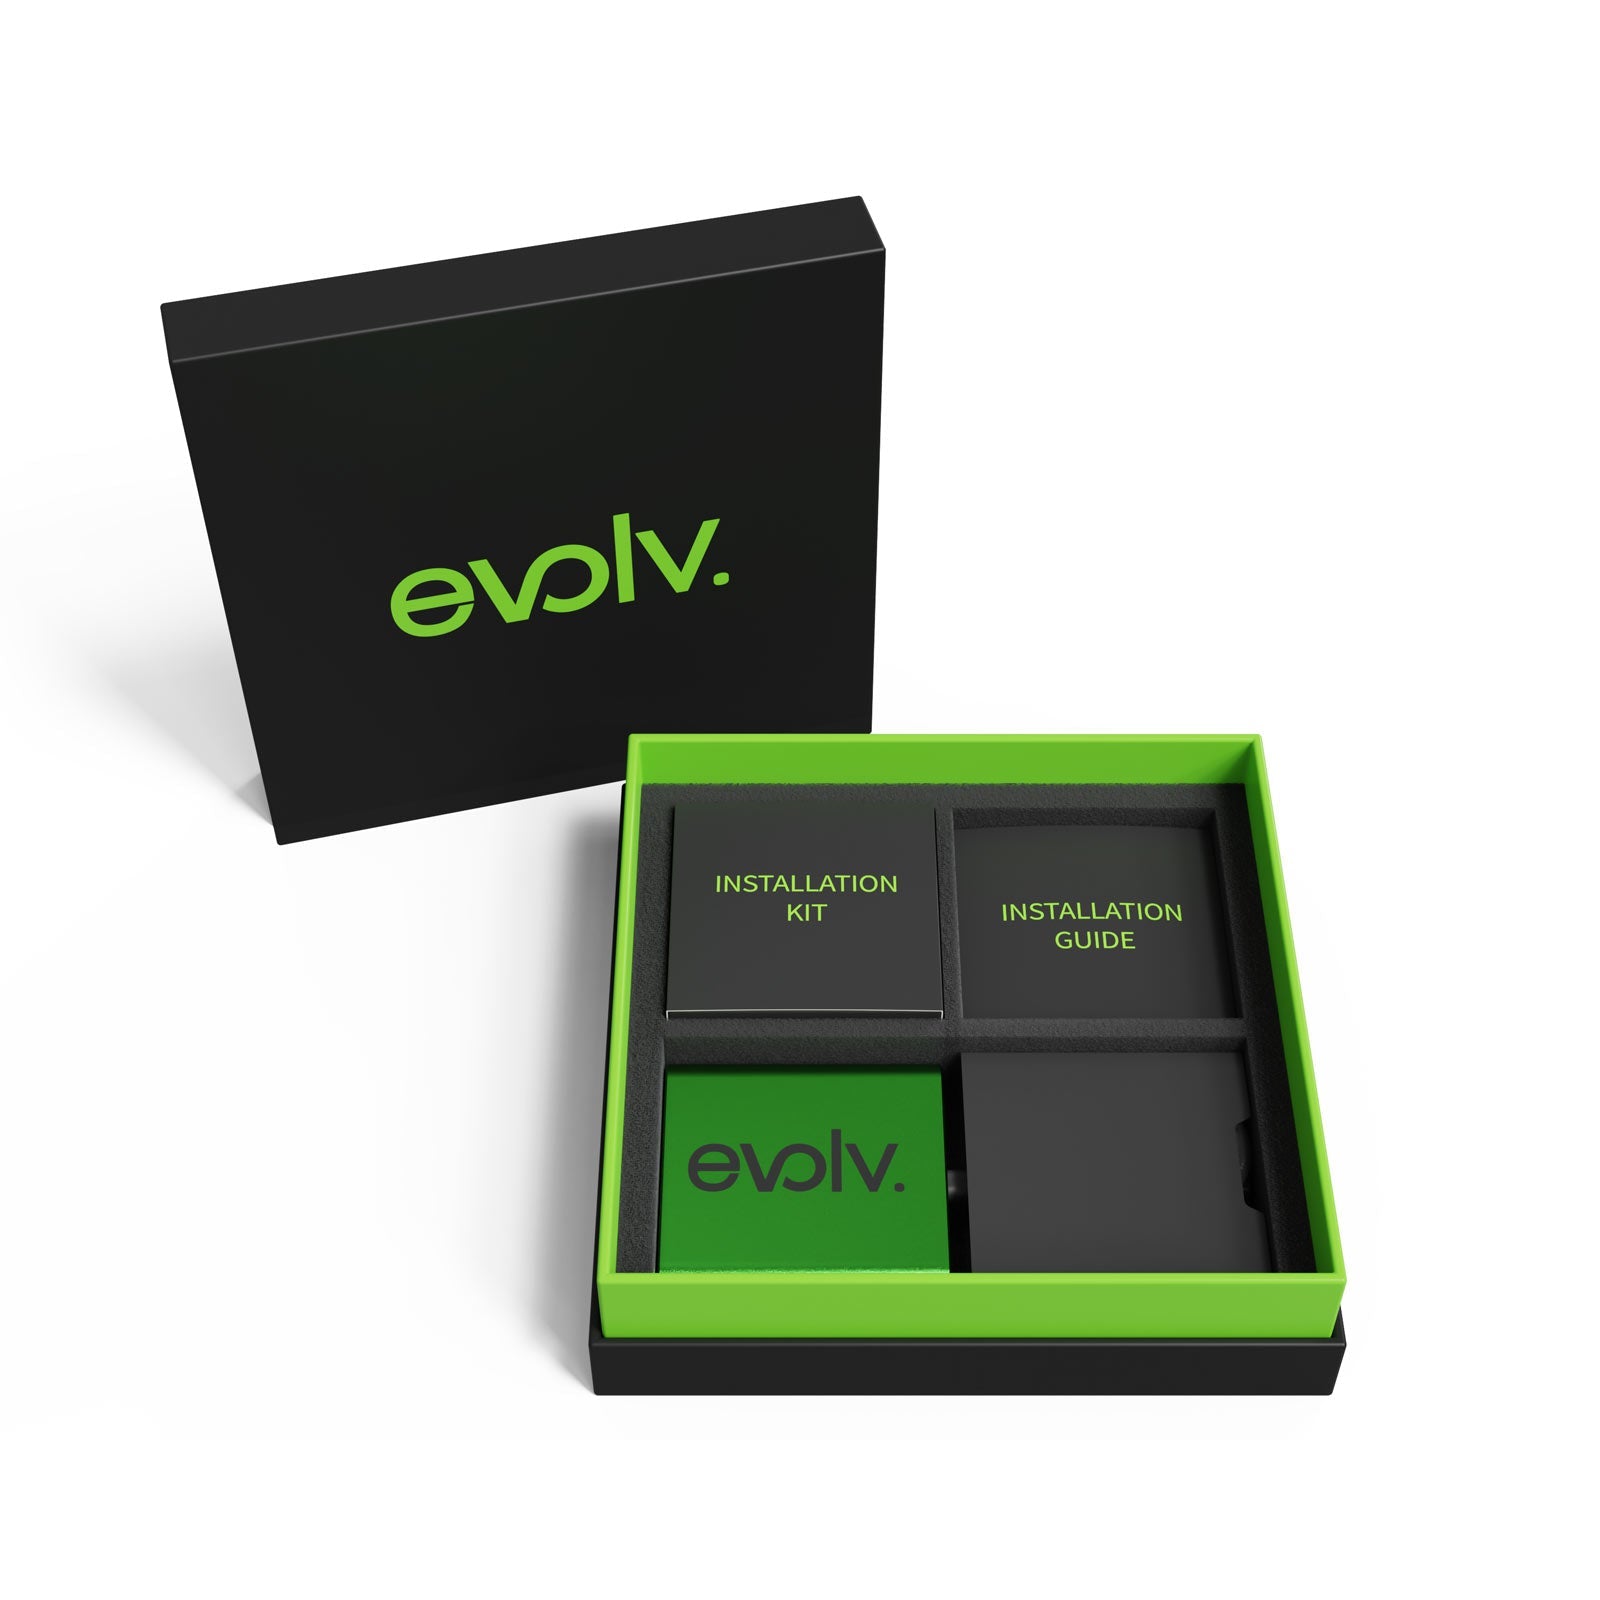 Increase your fuel mileage, performance and throttle response with an Evolv Chrysler LHS Performance Chip!